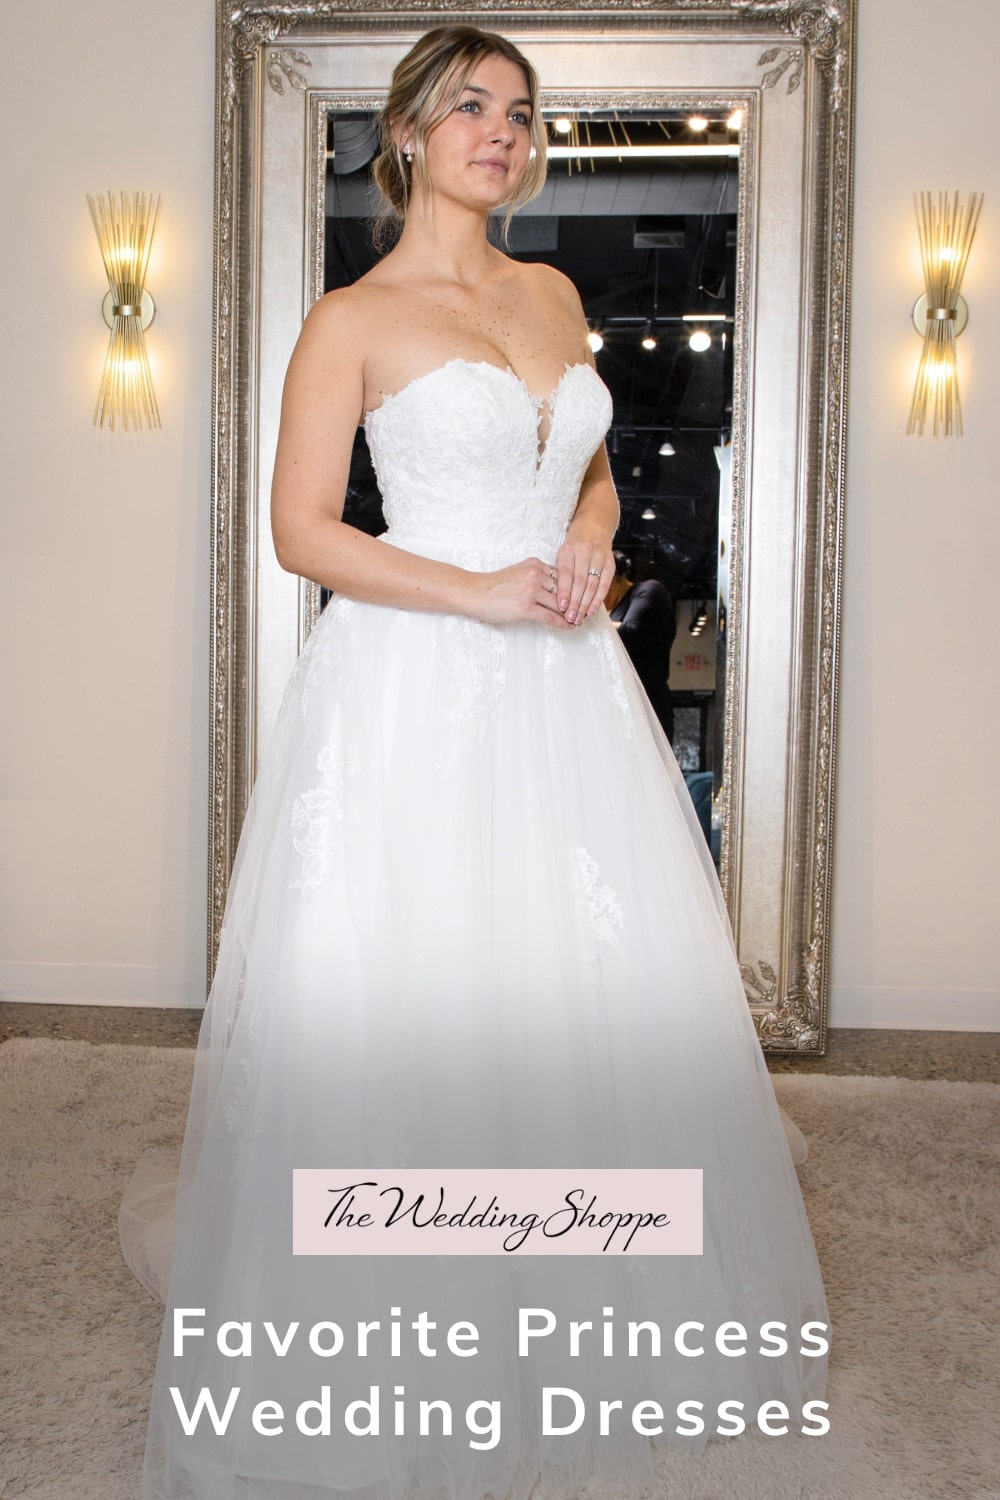 pinnable graphic for "Favorite Princess Wedding Dresses" from The Wedding Shoppe